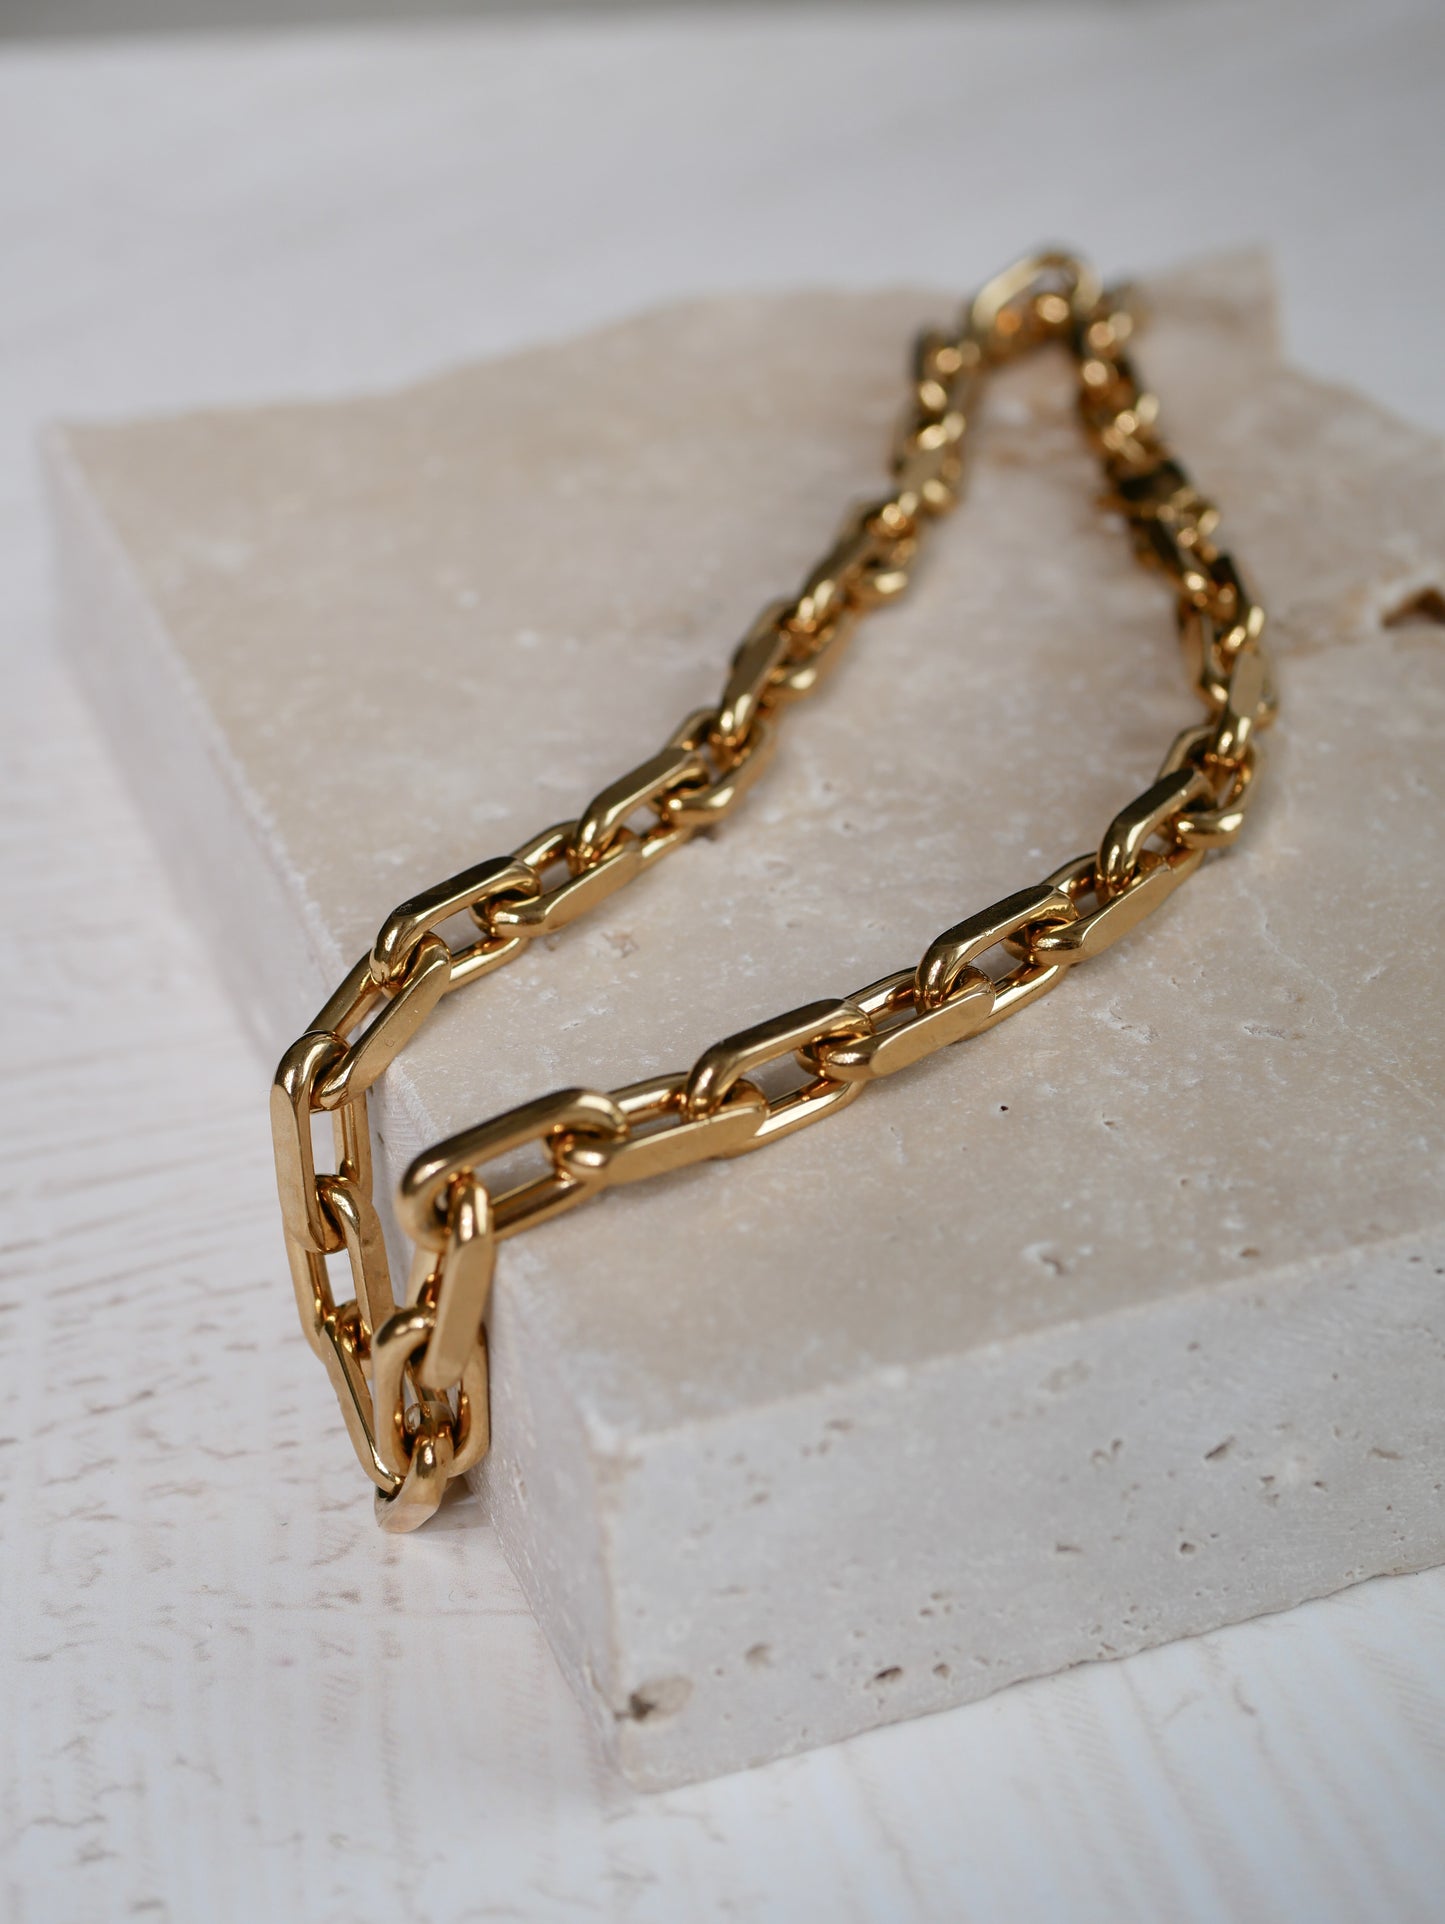 Chelsea Chunky Chain Necklace (Gold)